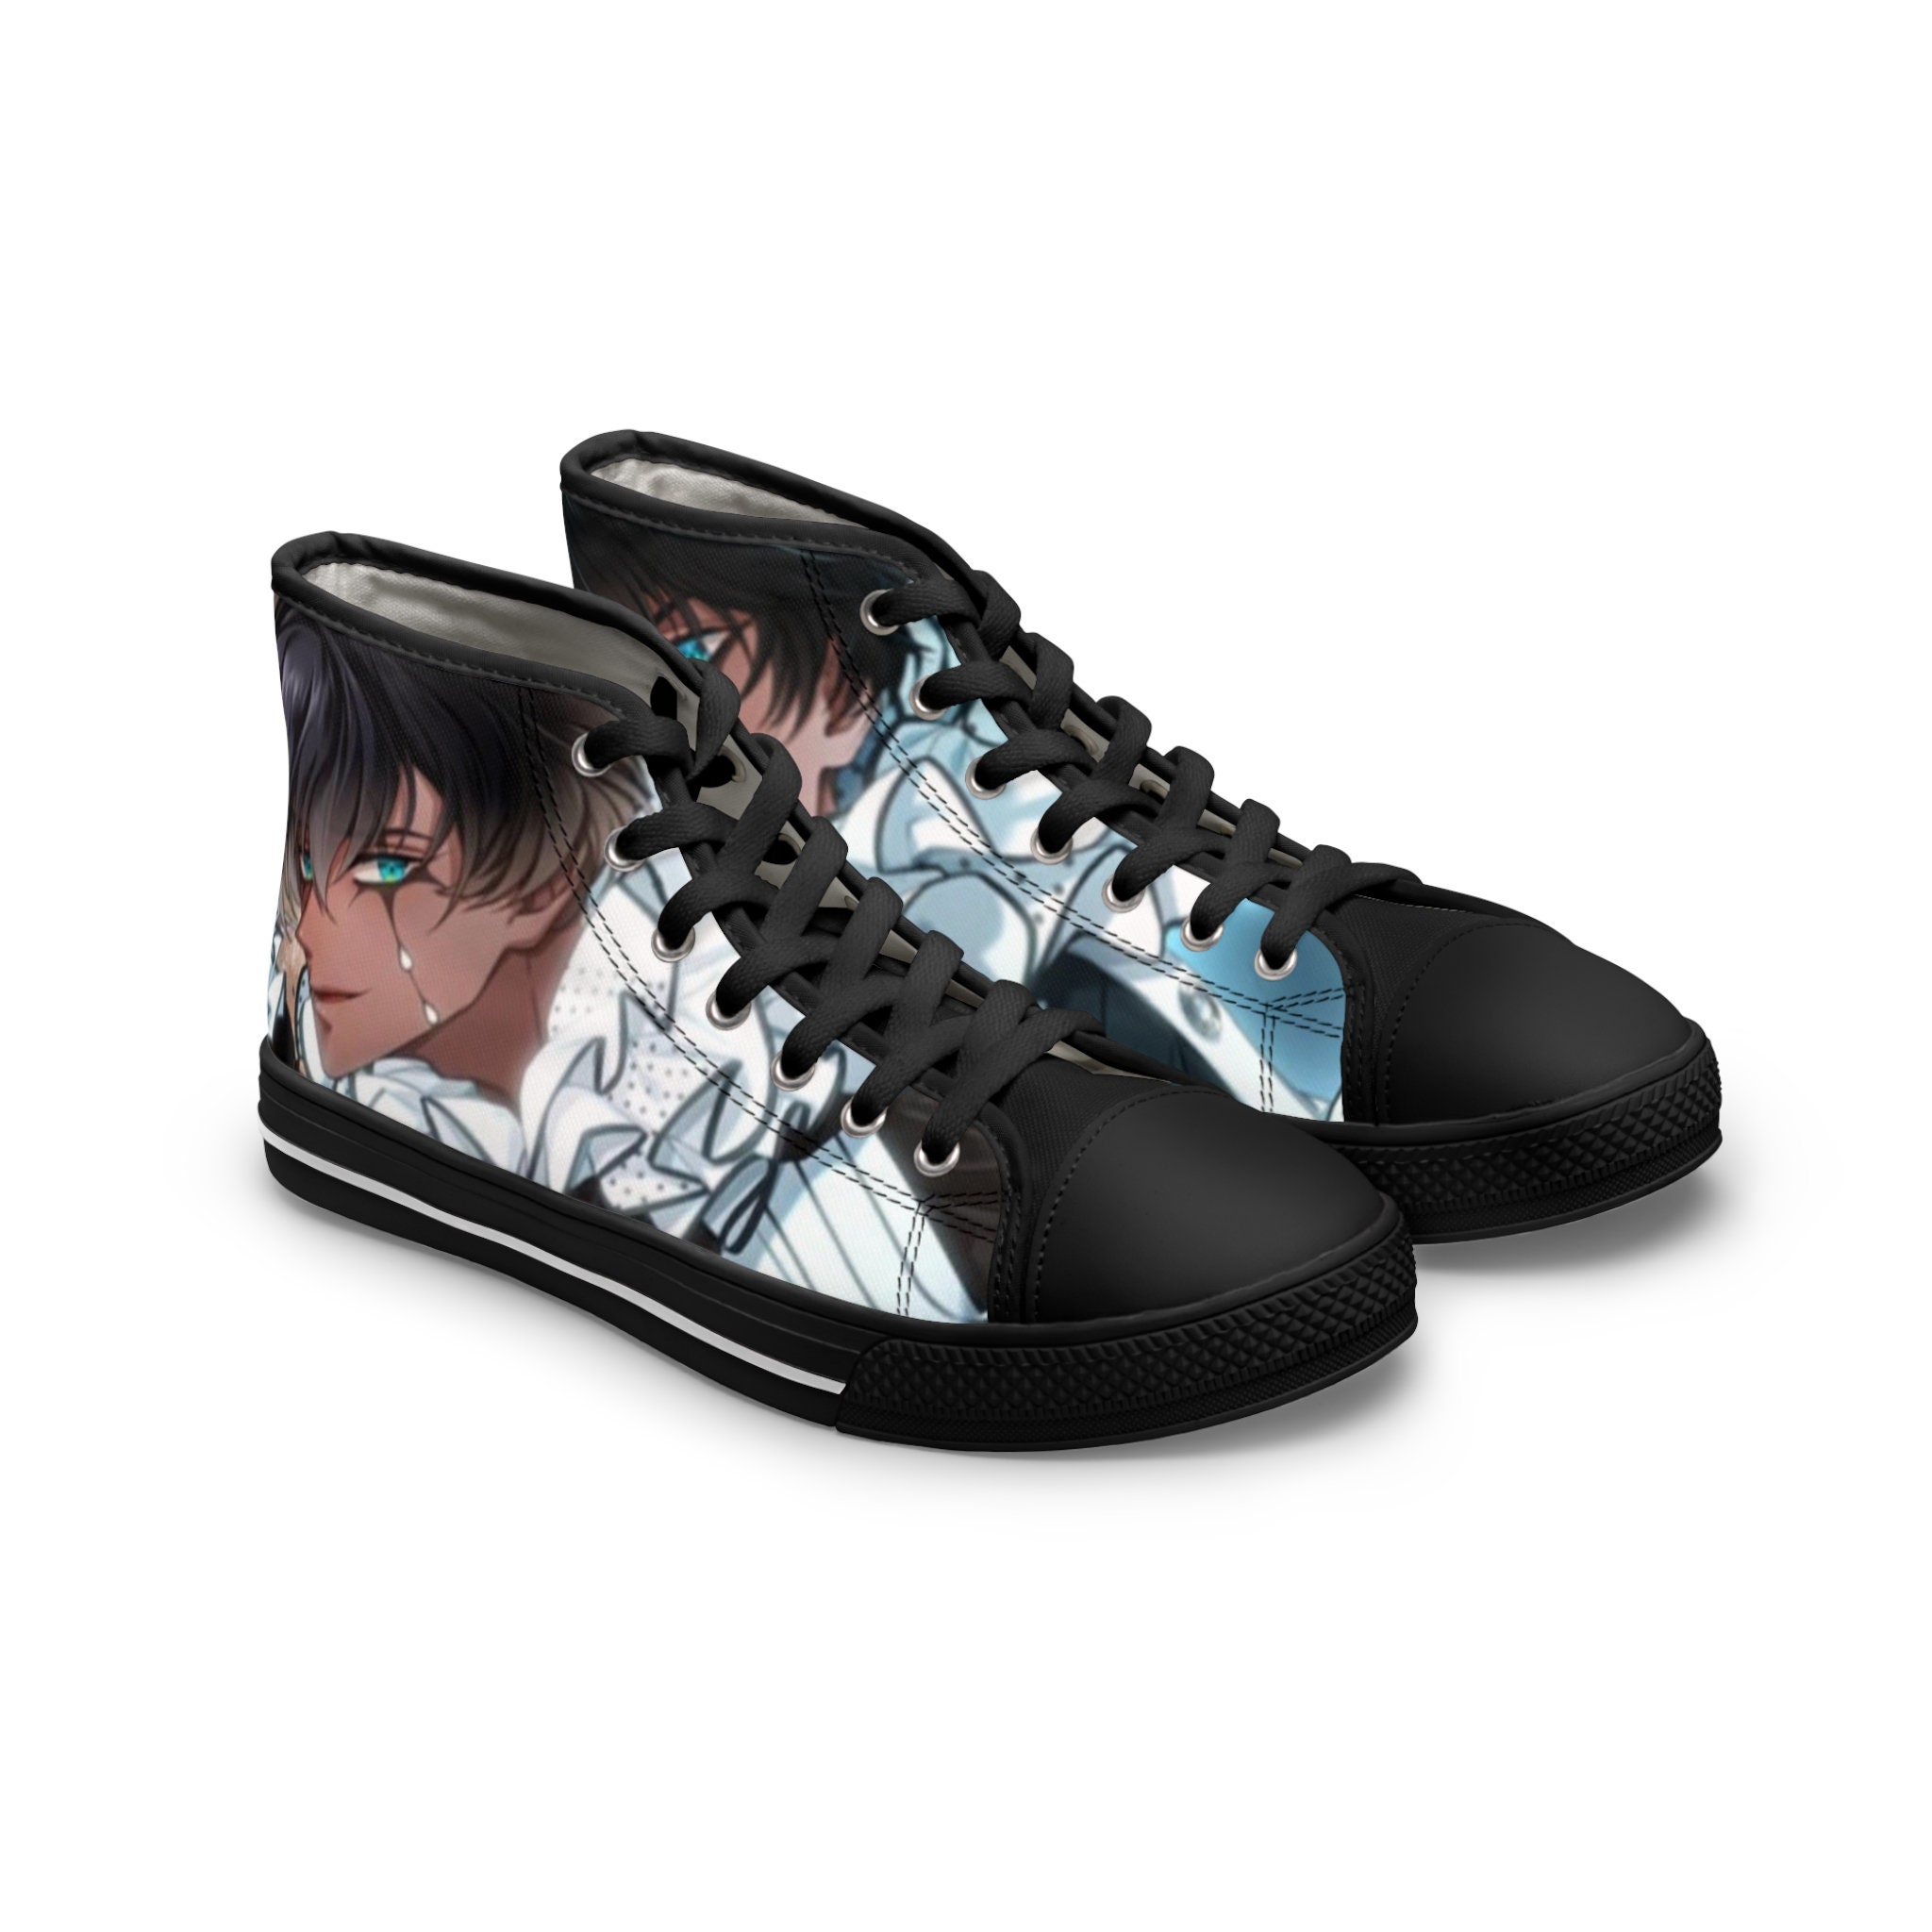 Anime shoes☄﹍◑shoes men 2021 new high-top sneakers Naruto Penn animation  joint aj air force one st | Shopee Philippines